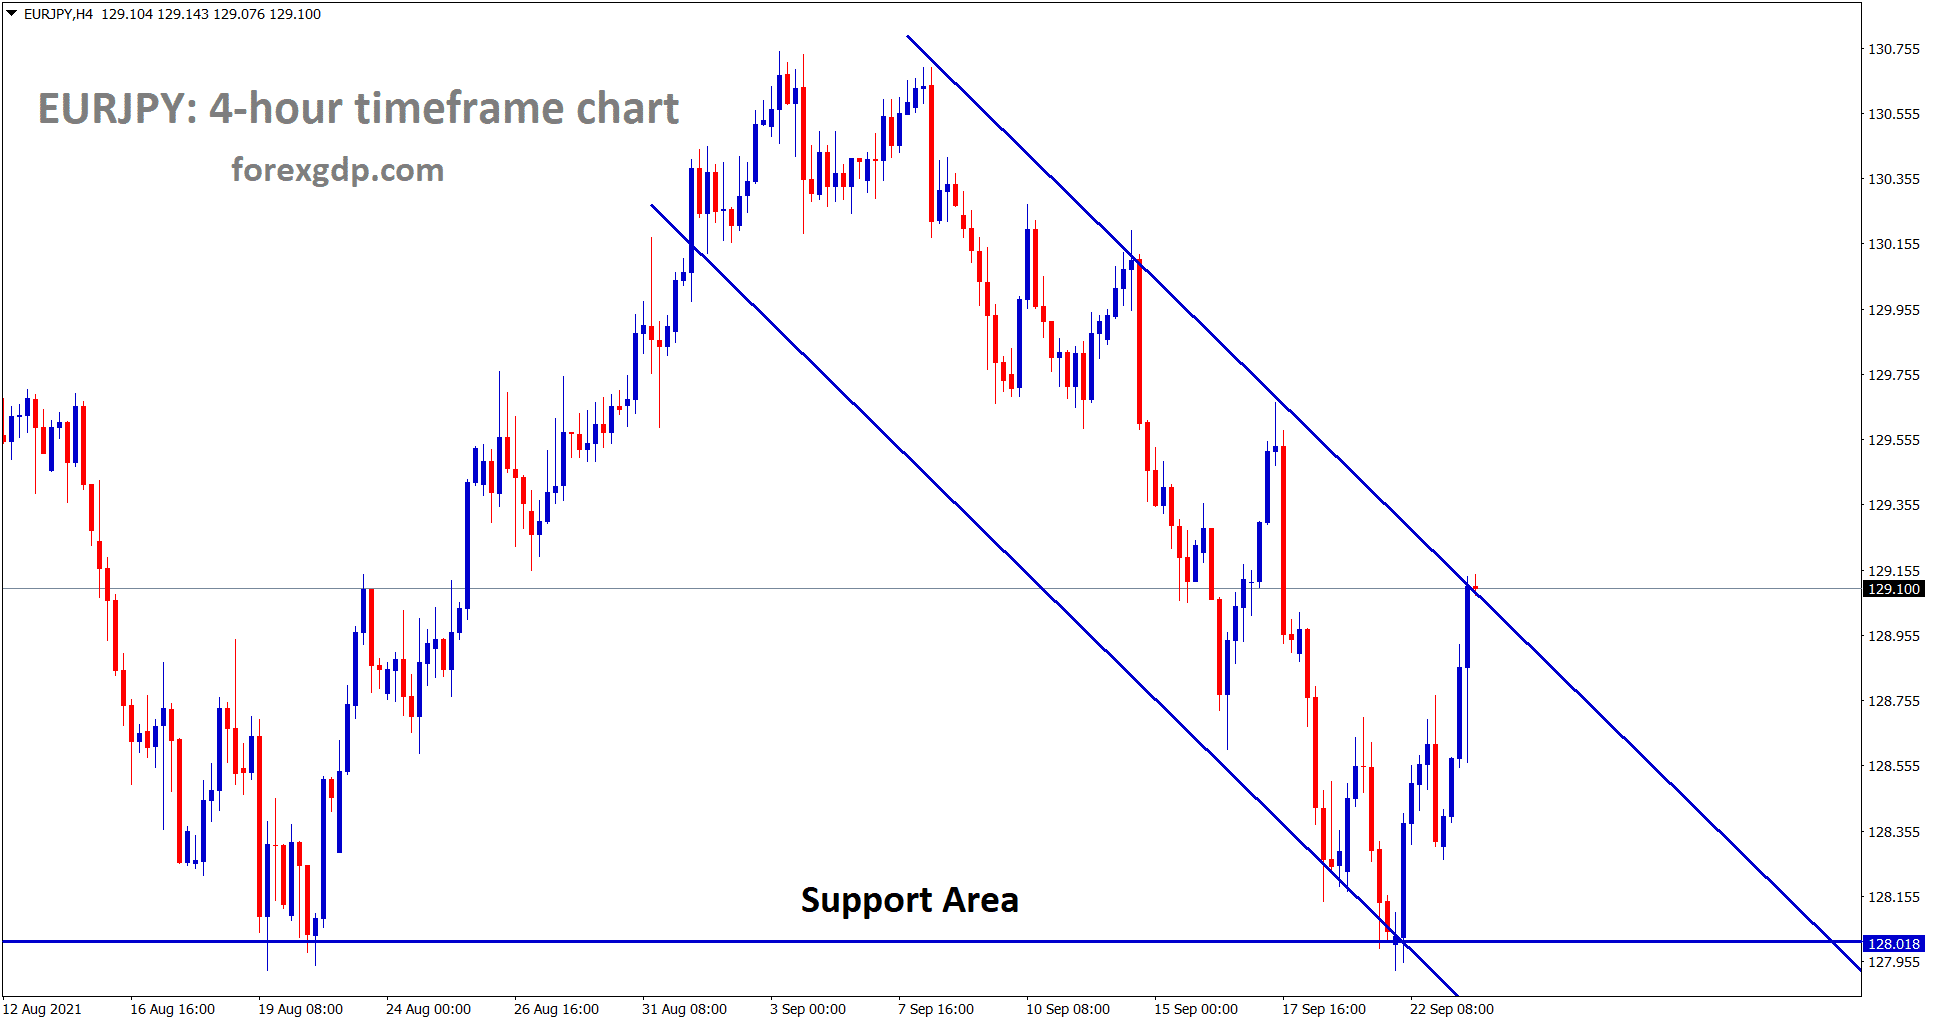 EURJPY rebound from the support area and reached the lower high of the descending channel